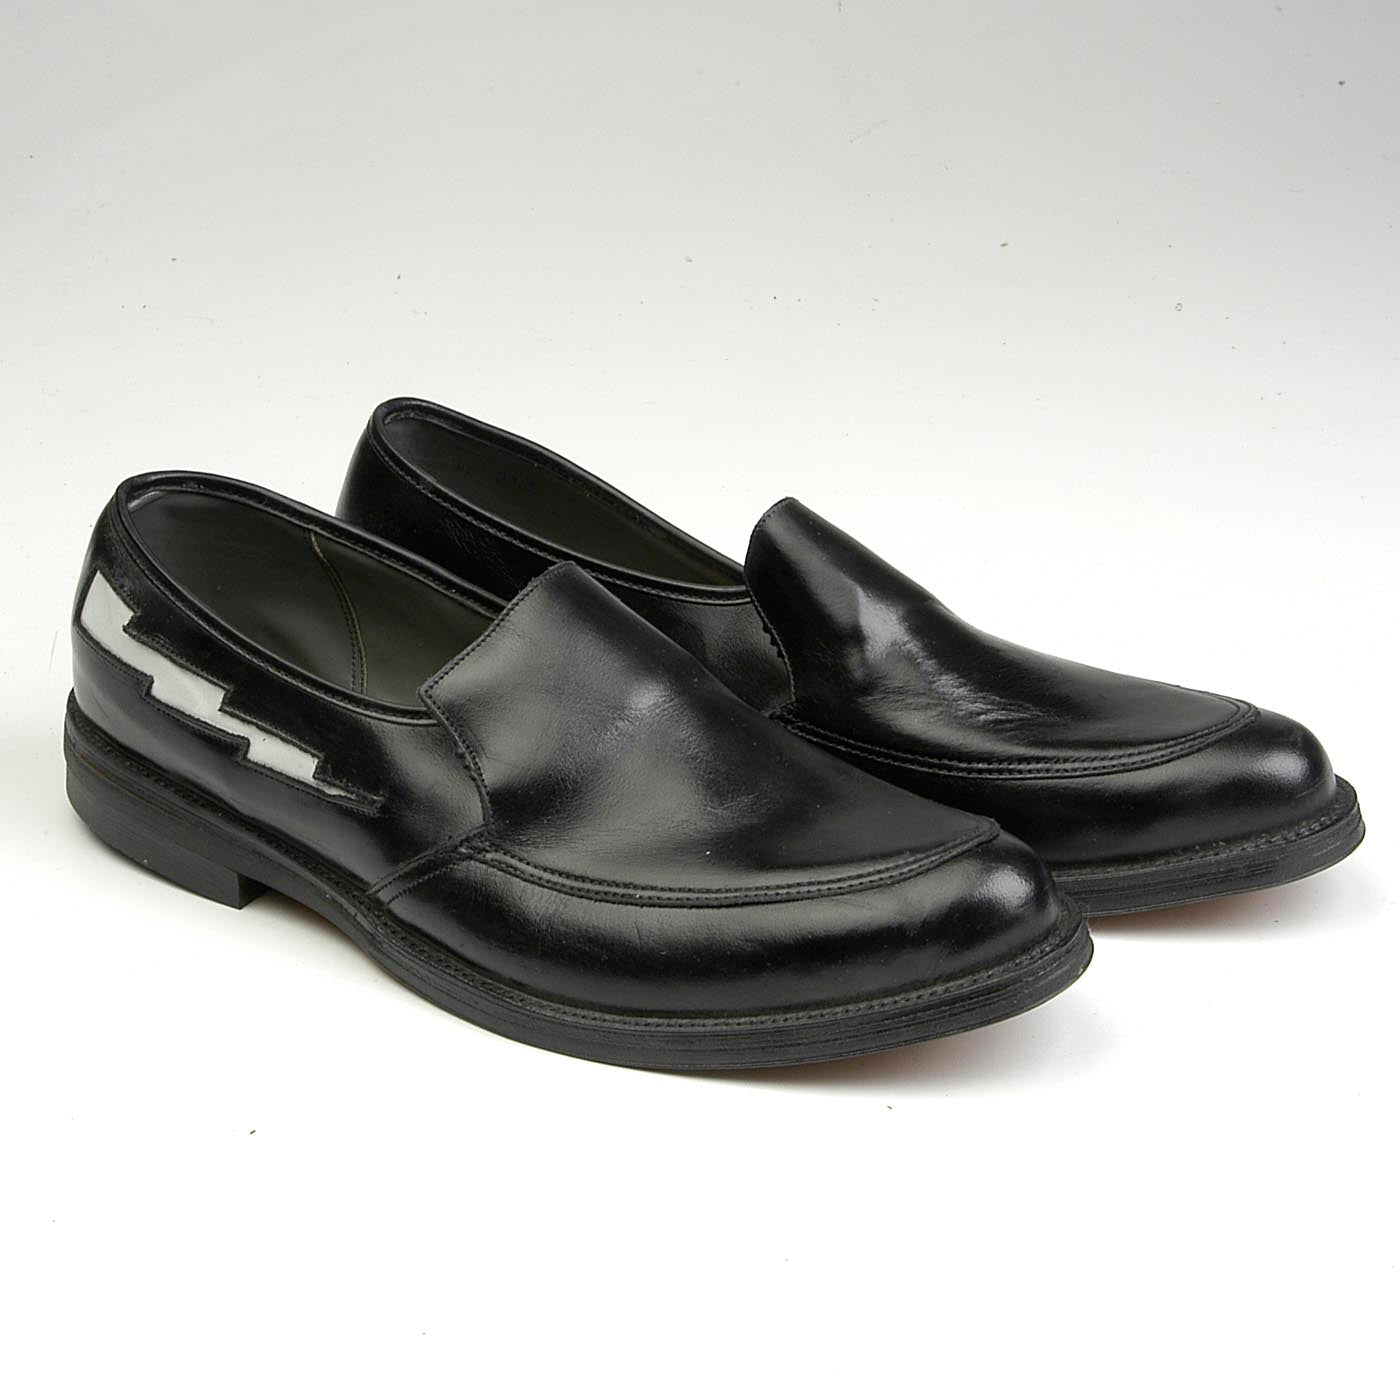 sz 11 Deadstock 1950s Men's Rockabilly Loafers with White Lightning Bolts